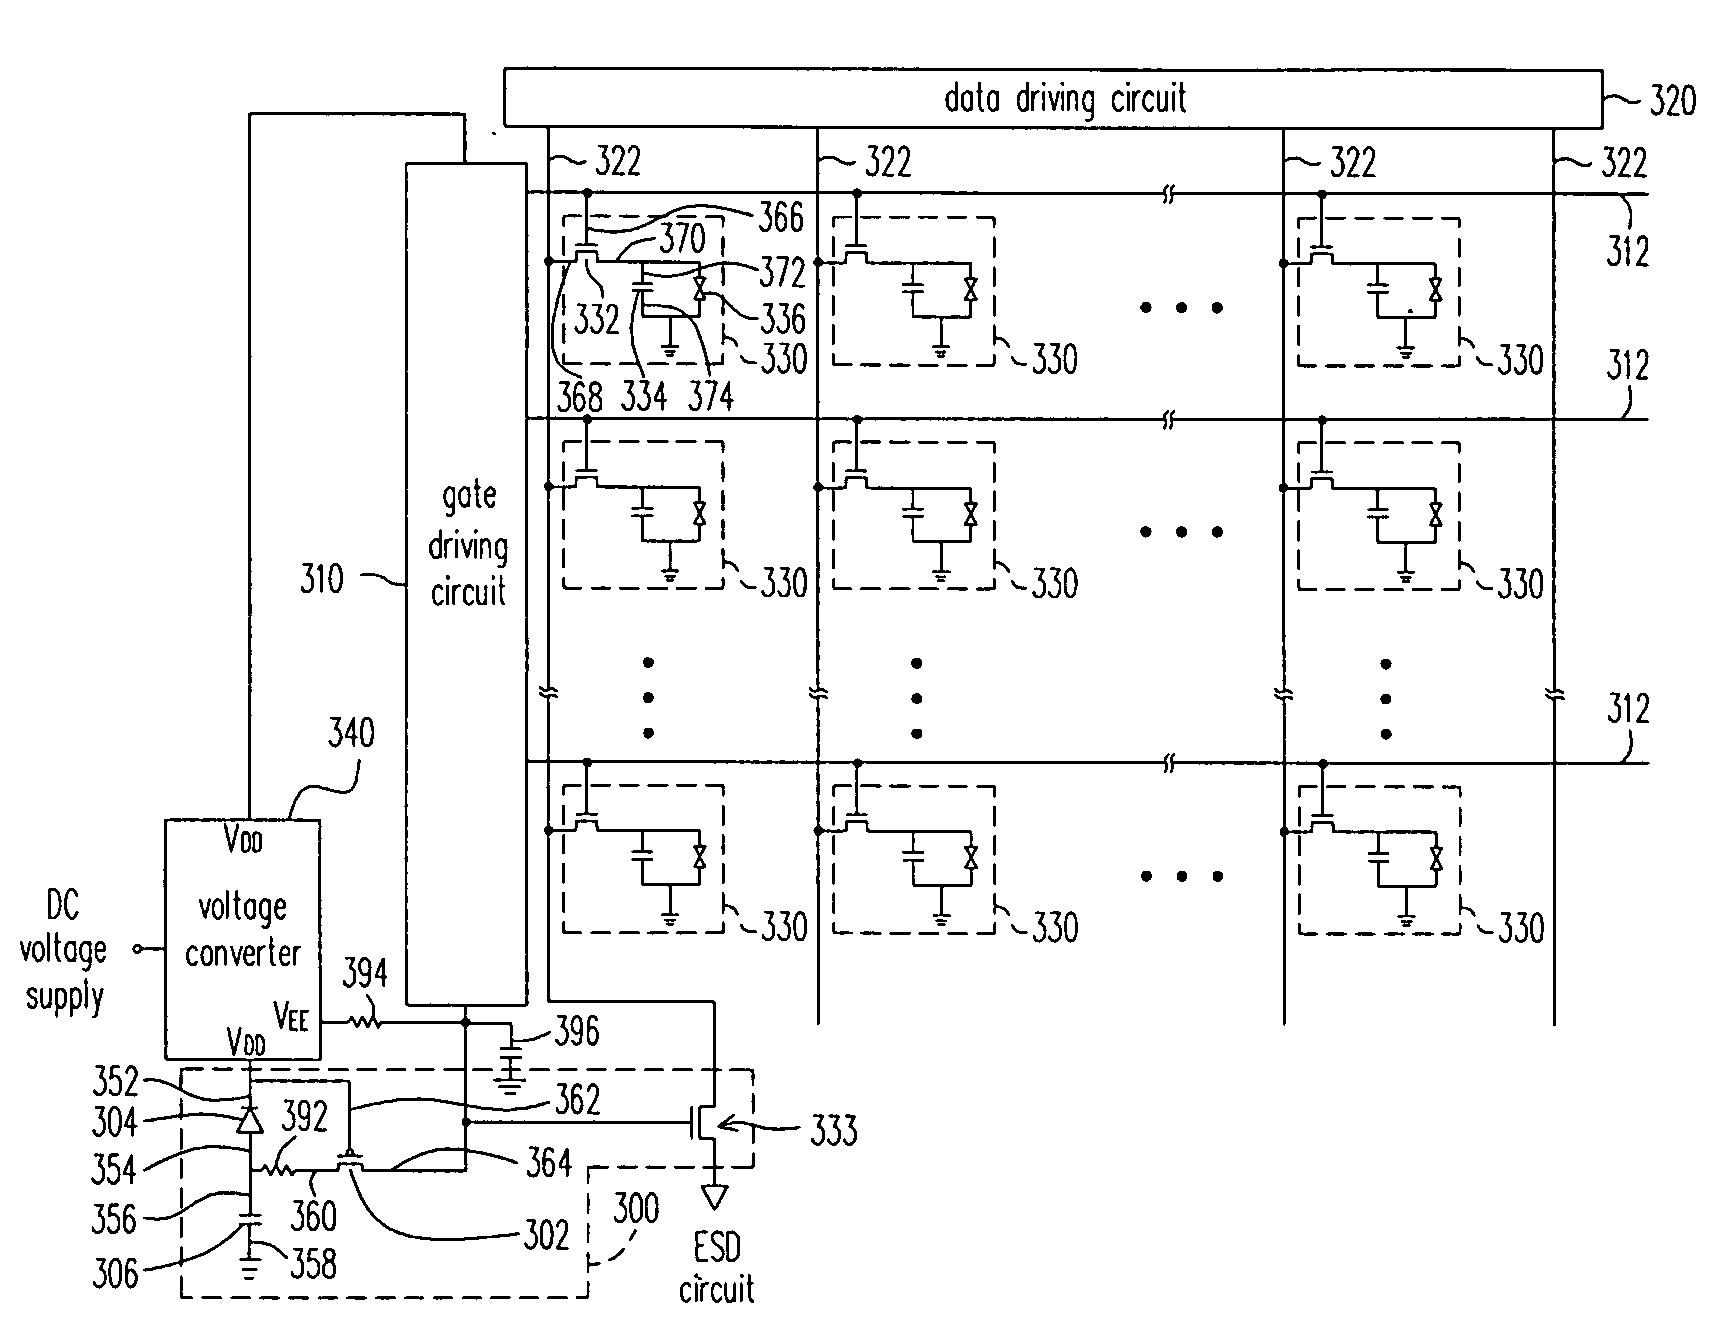 Display panel with image sticking elimination circuit and driving circuit with the same